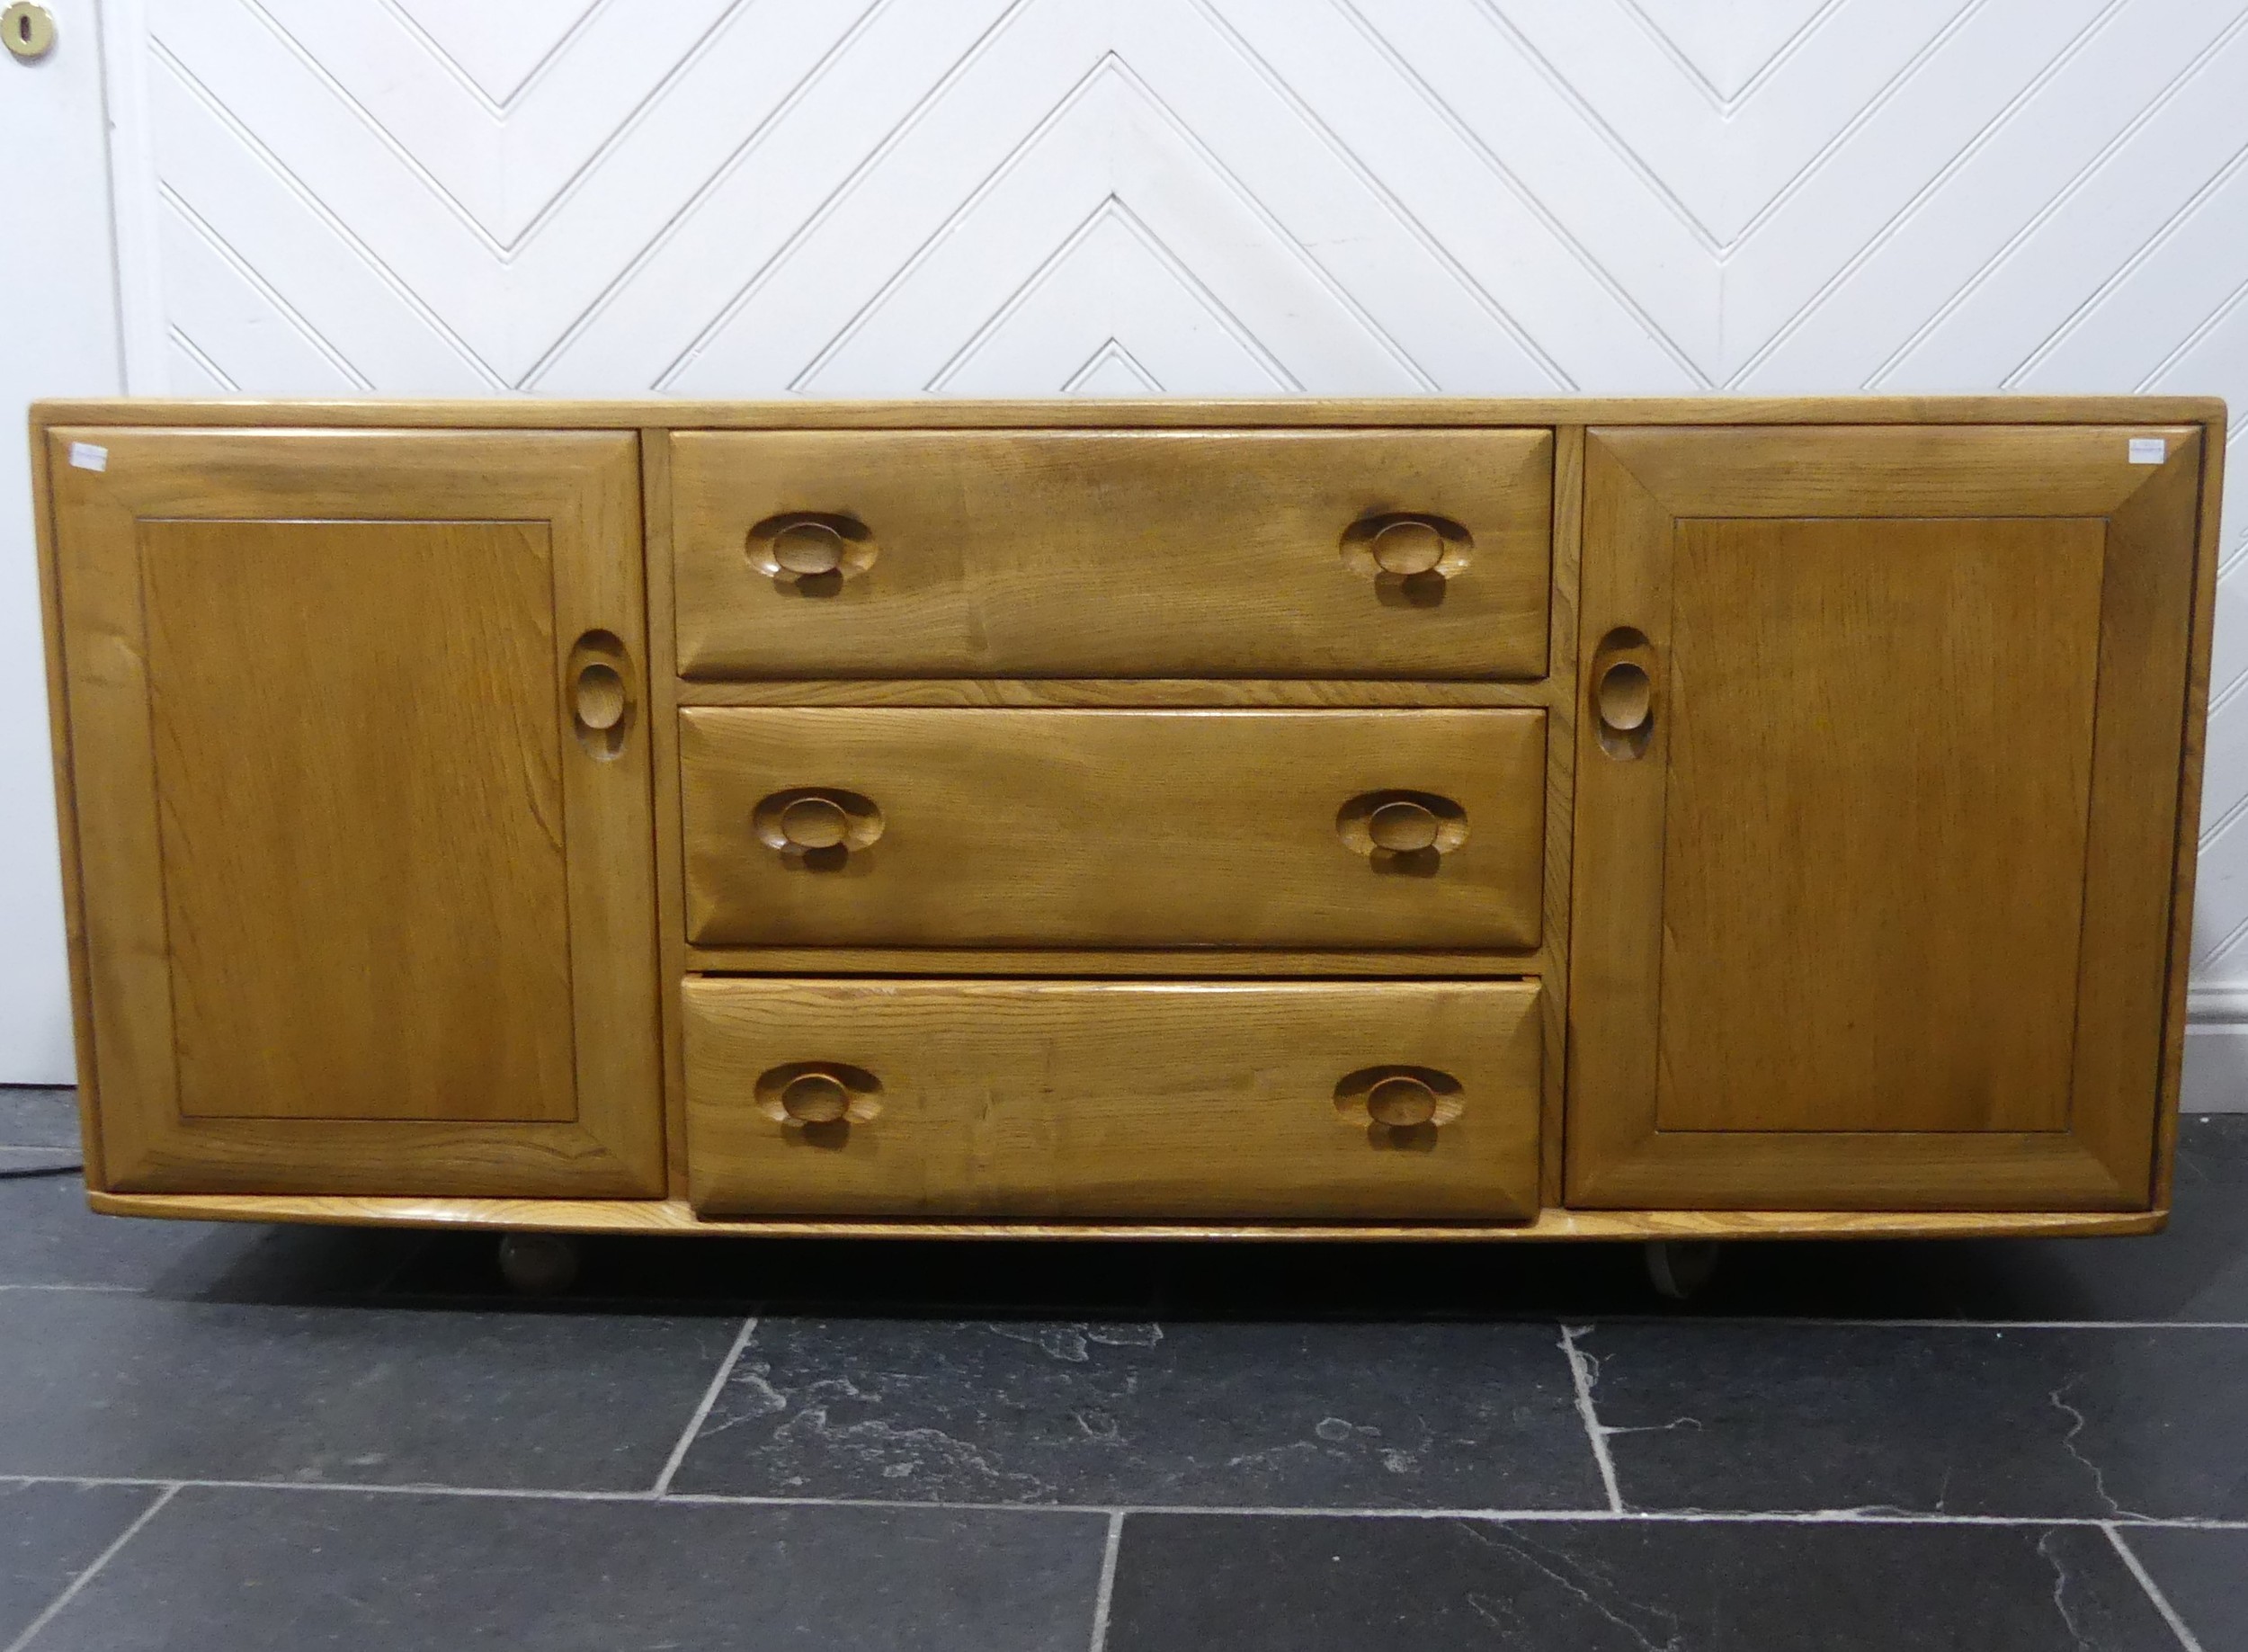 An Ercol "Windsor" blond elm Sideboard, model No. 455, fitted with three central drawers with an